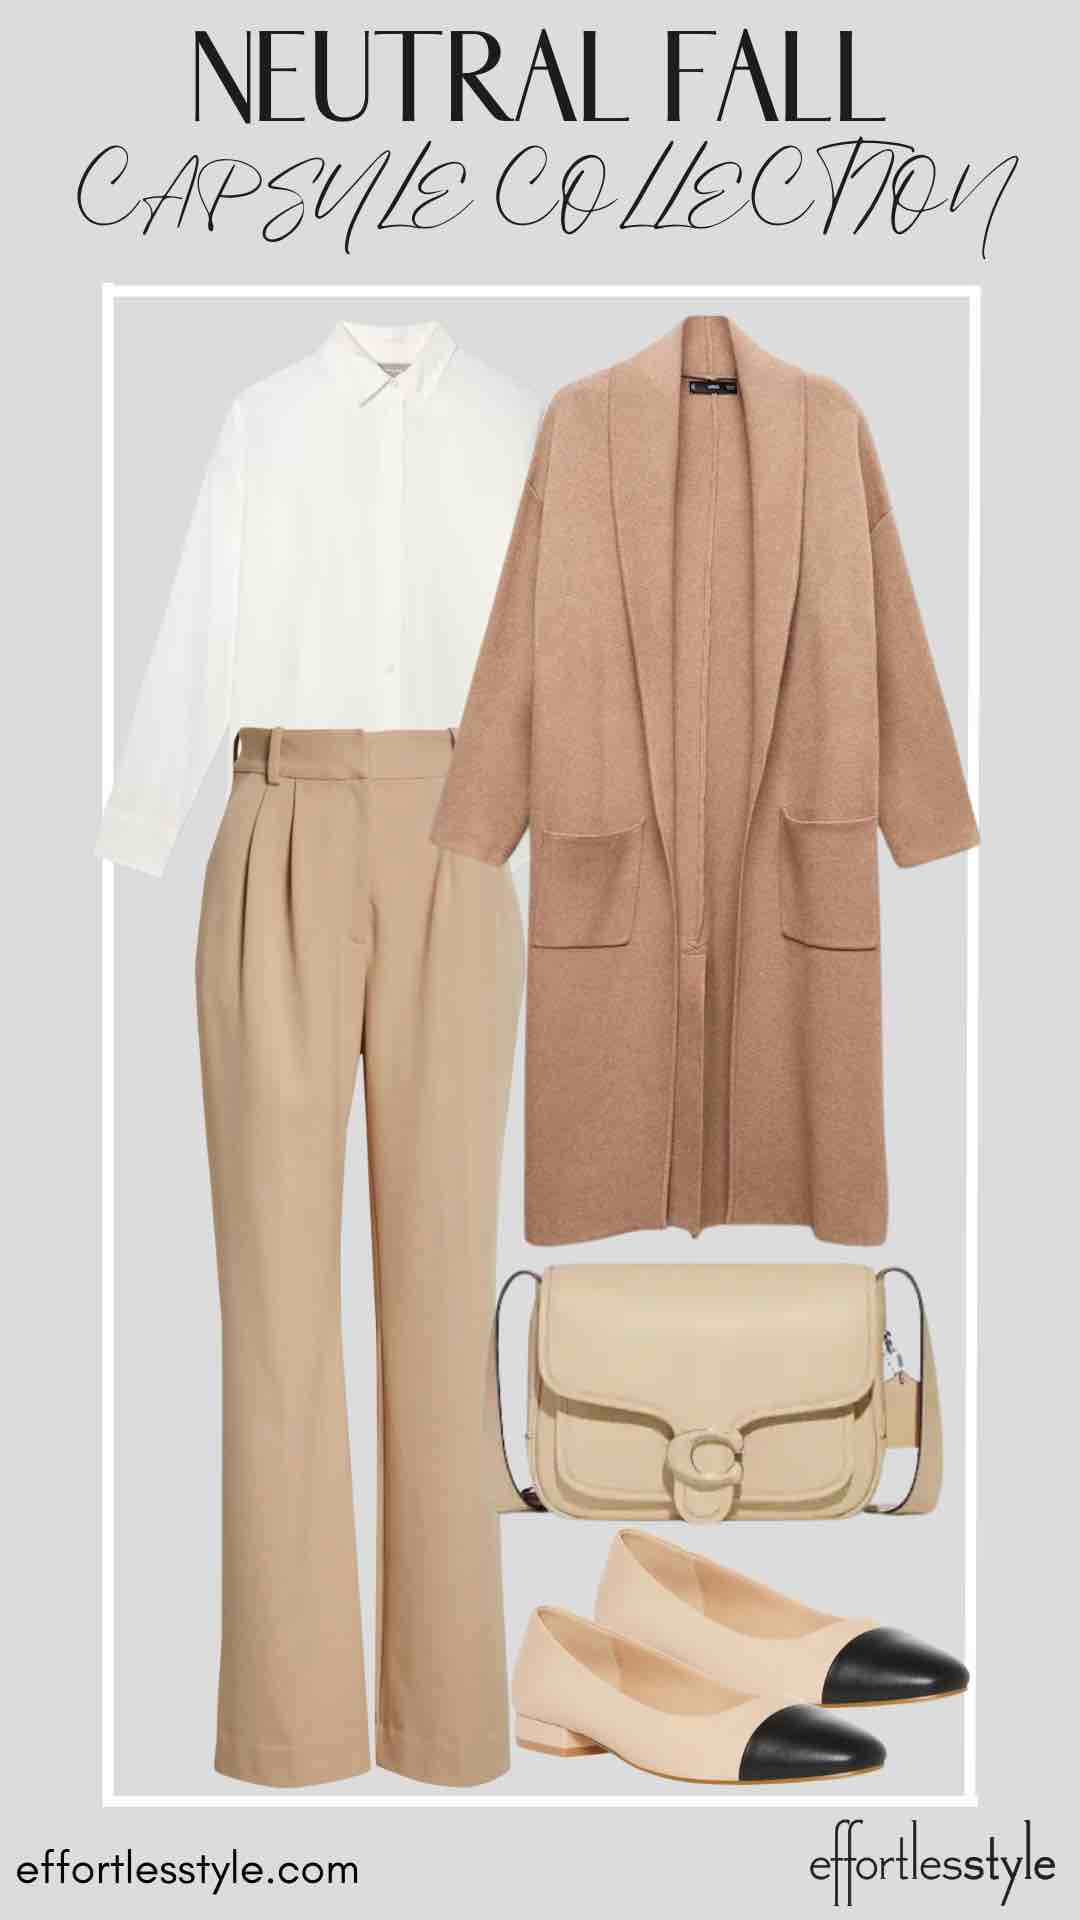 Coatigan & Button-Up Shirt & Trousers tone on tone looks creating a monochromatic look mixing browns what to wear to the office what to wear to work nashville stylists share fall style inspo for the office the best fall accessories the most versatile accessories for fall the trouser trend styling trousers for the office